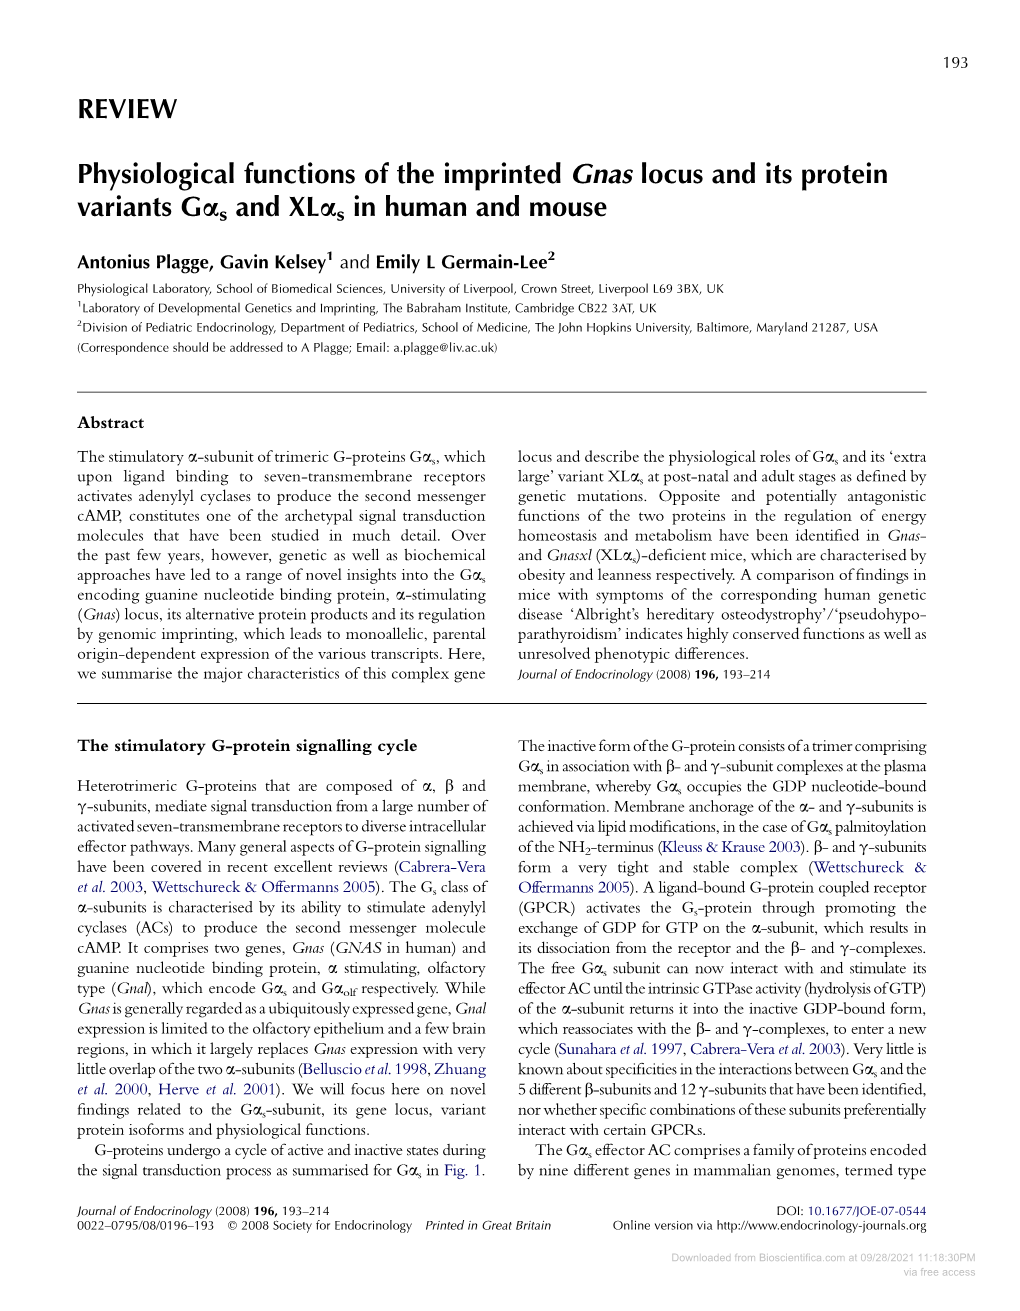 REVIEW Physiological Functions of the Imprinted Gnas Locus and Its